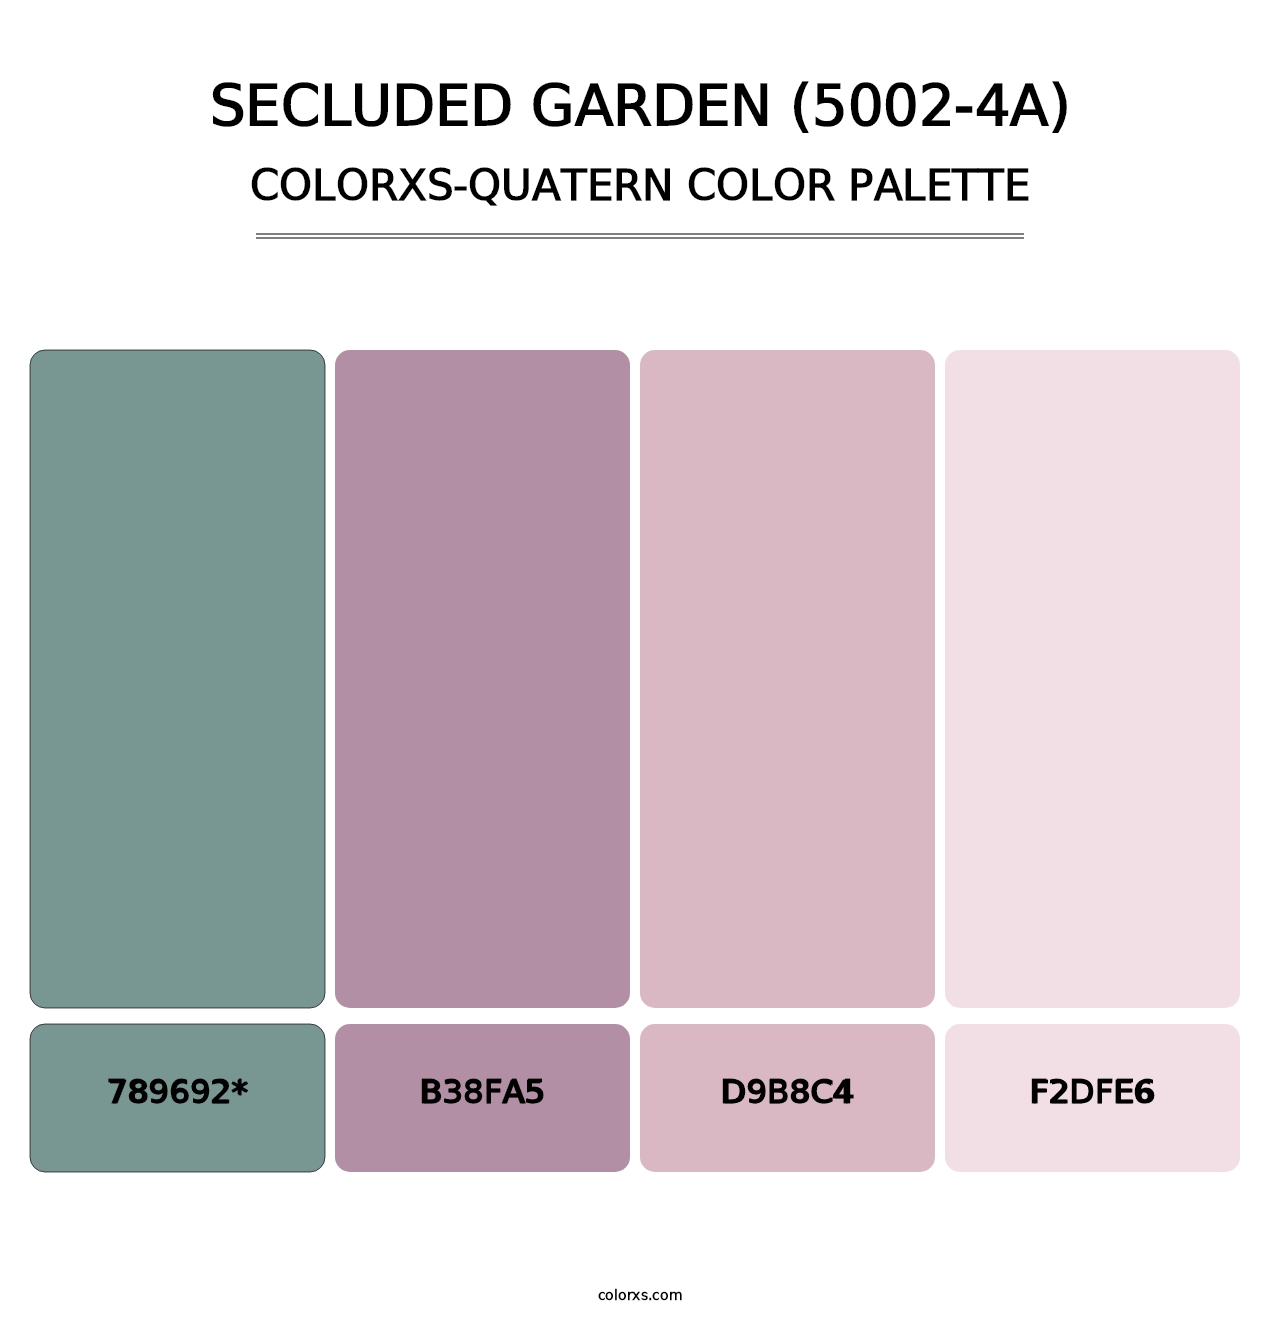 Secluded Garden (5002-4A) - Colorxs Quatern Palette